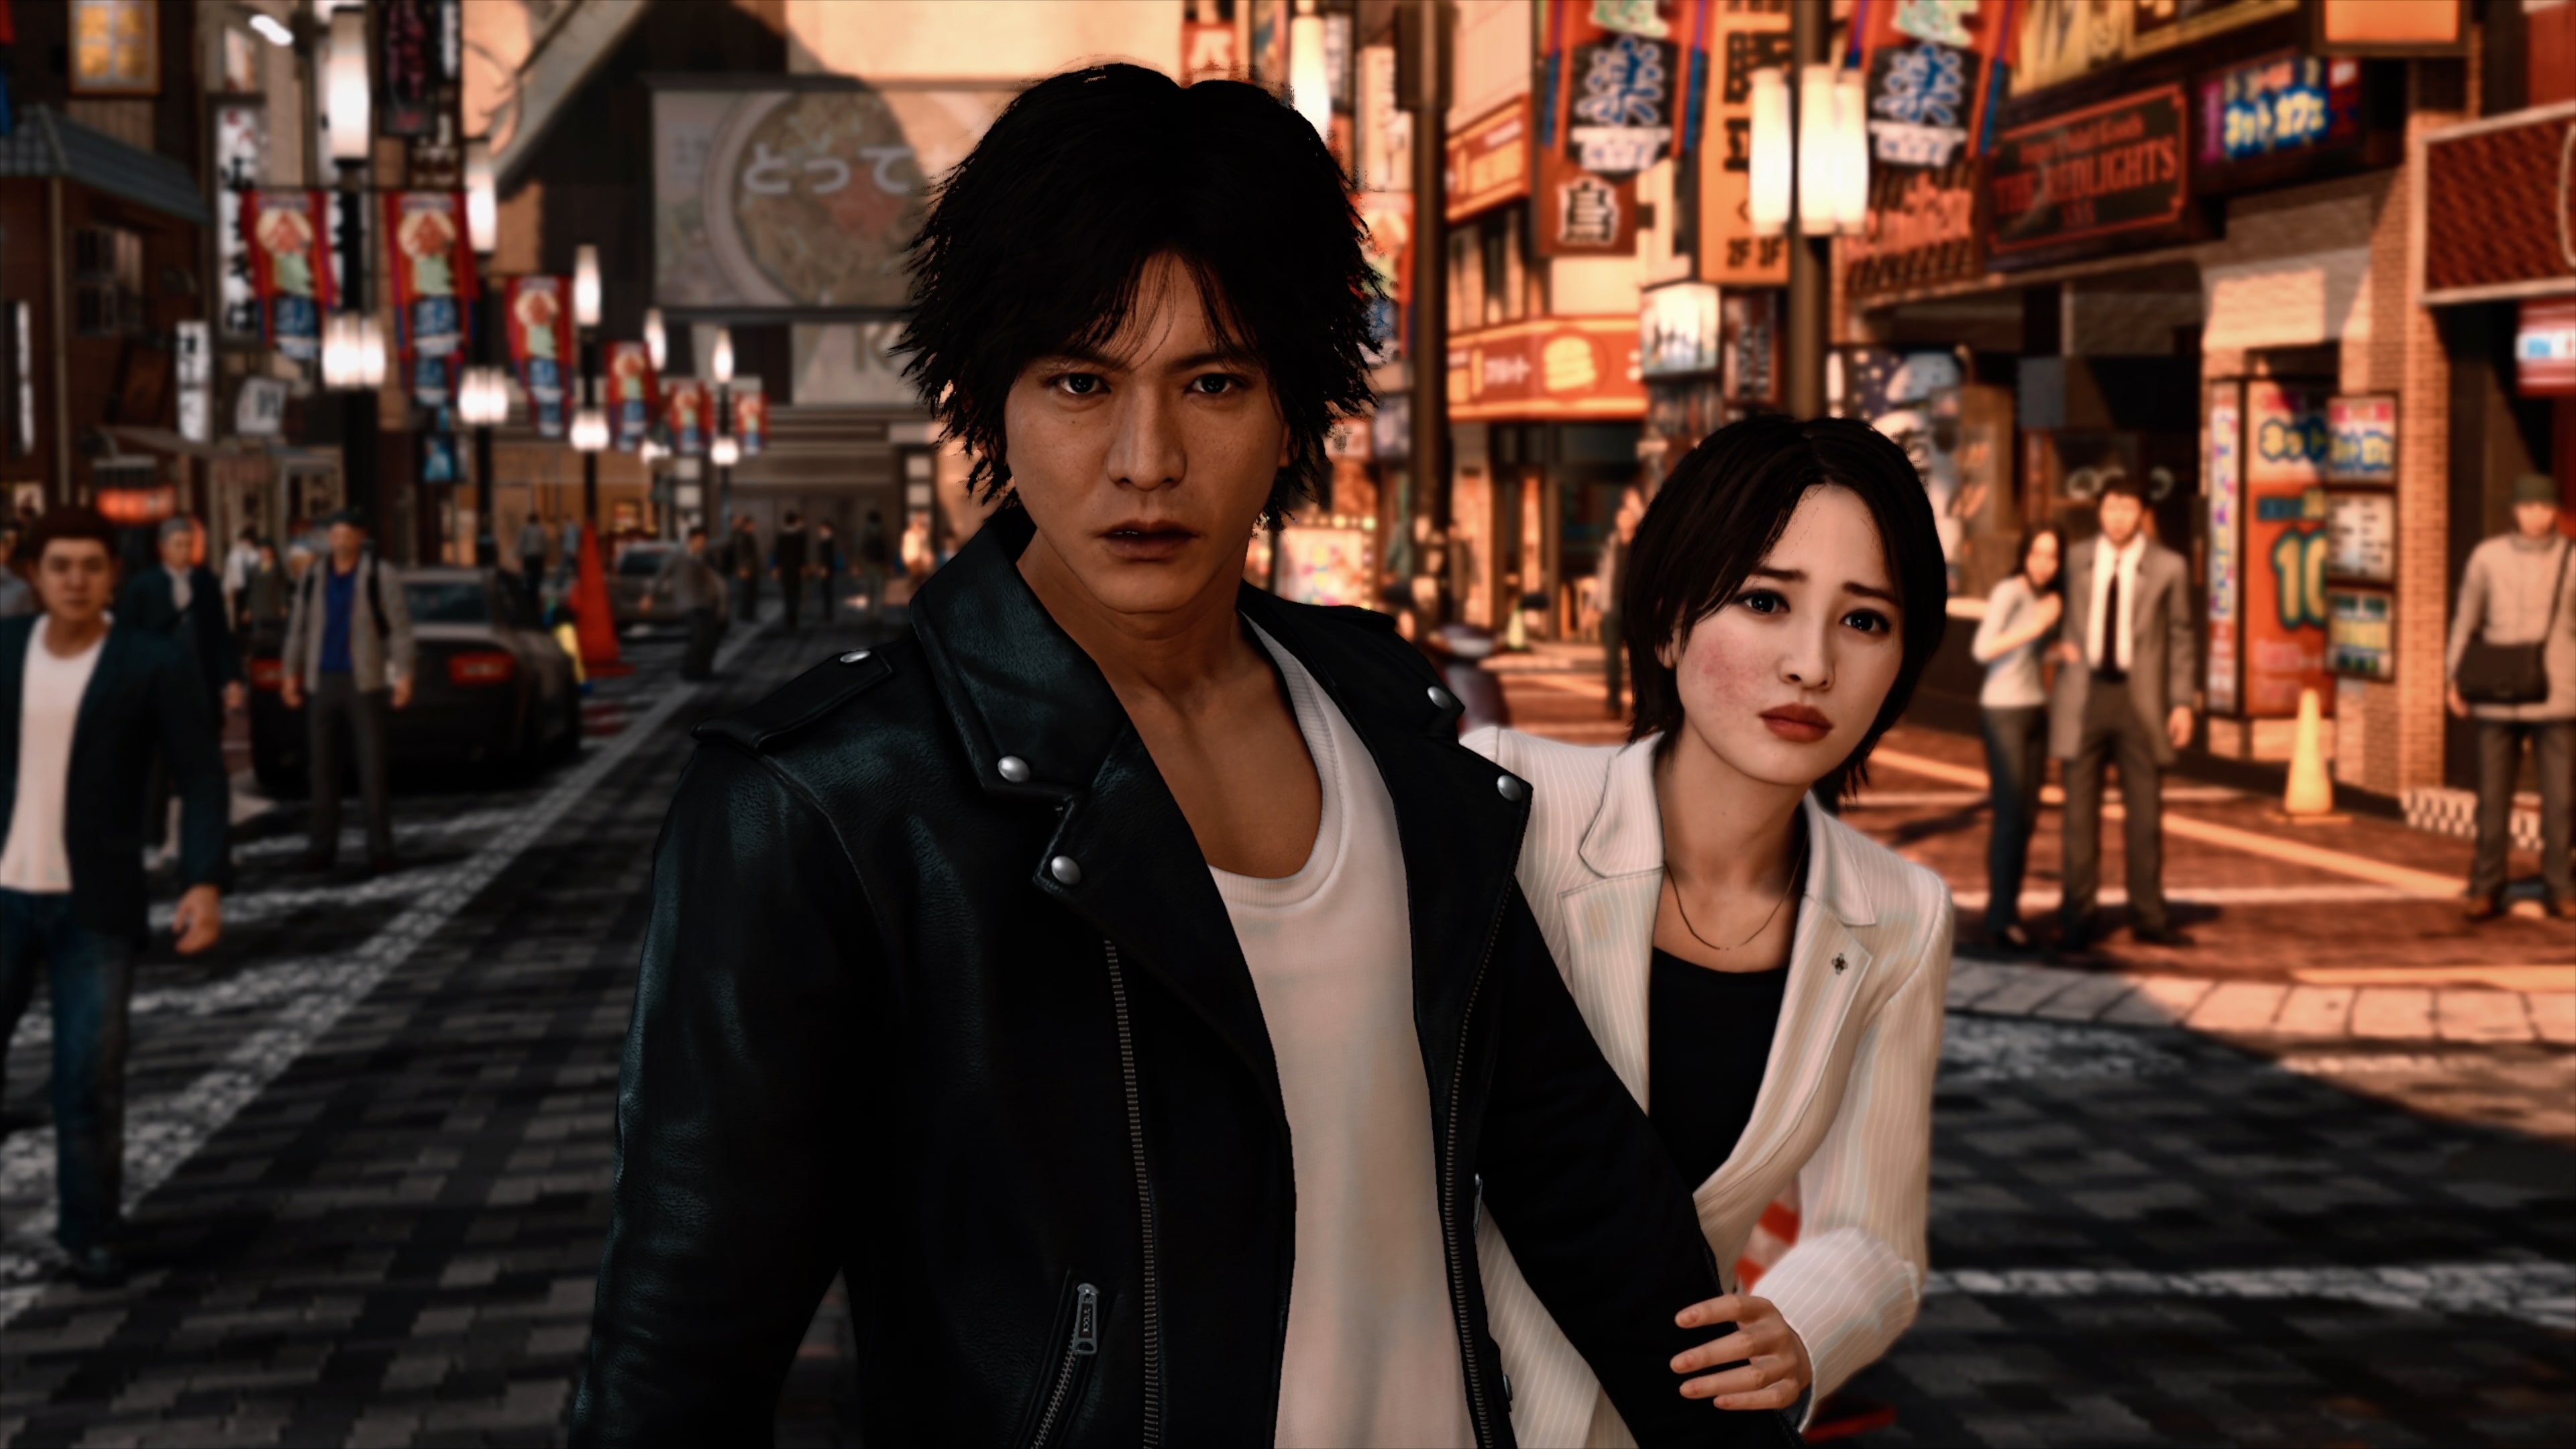 Judgment PS5 - Coolblue - Before 23:59, delivered tomorrow